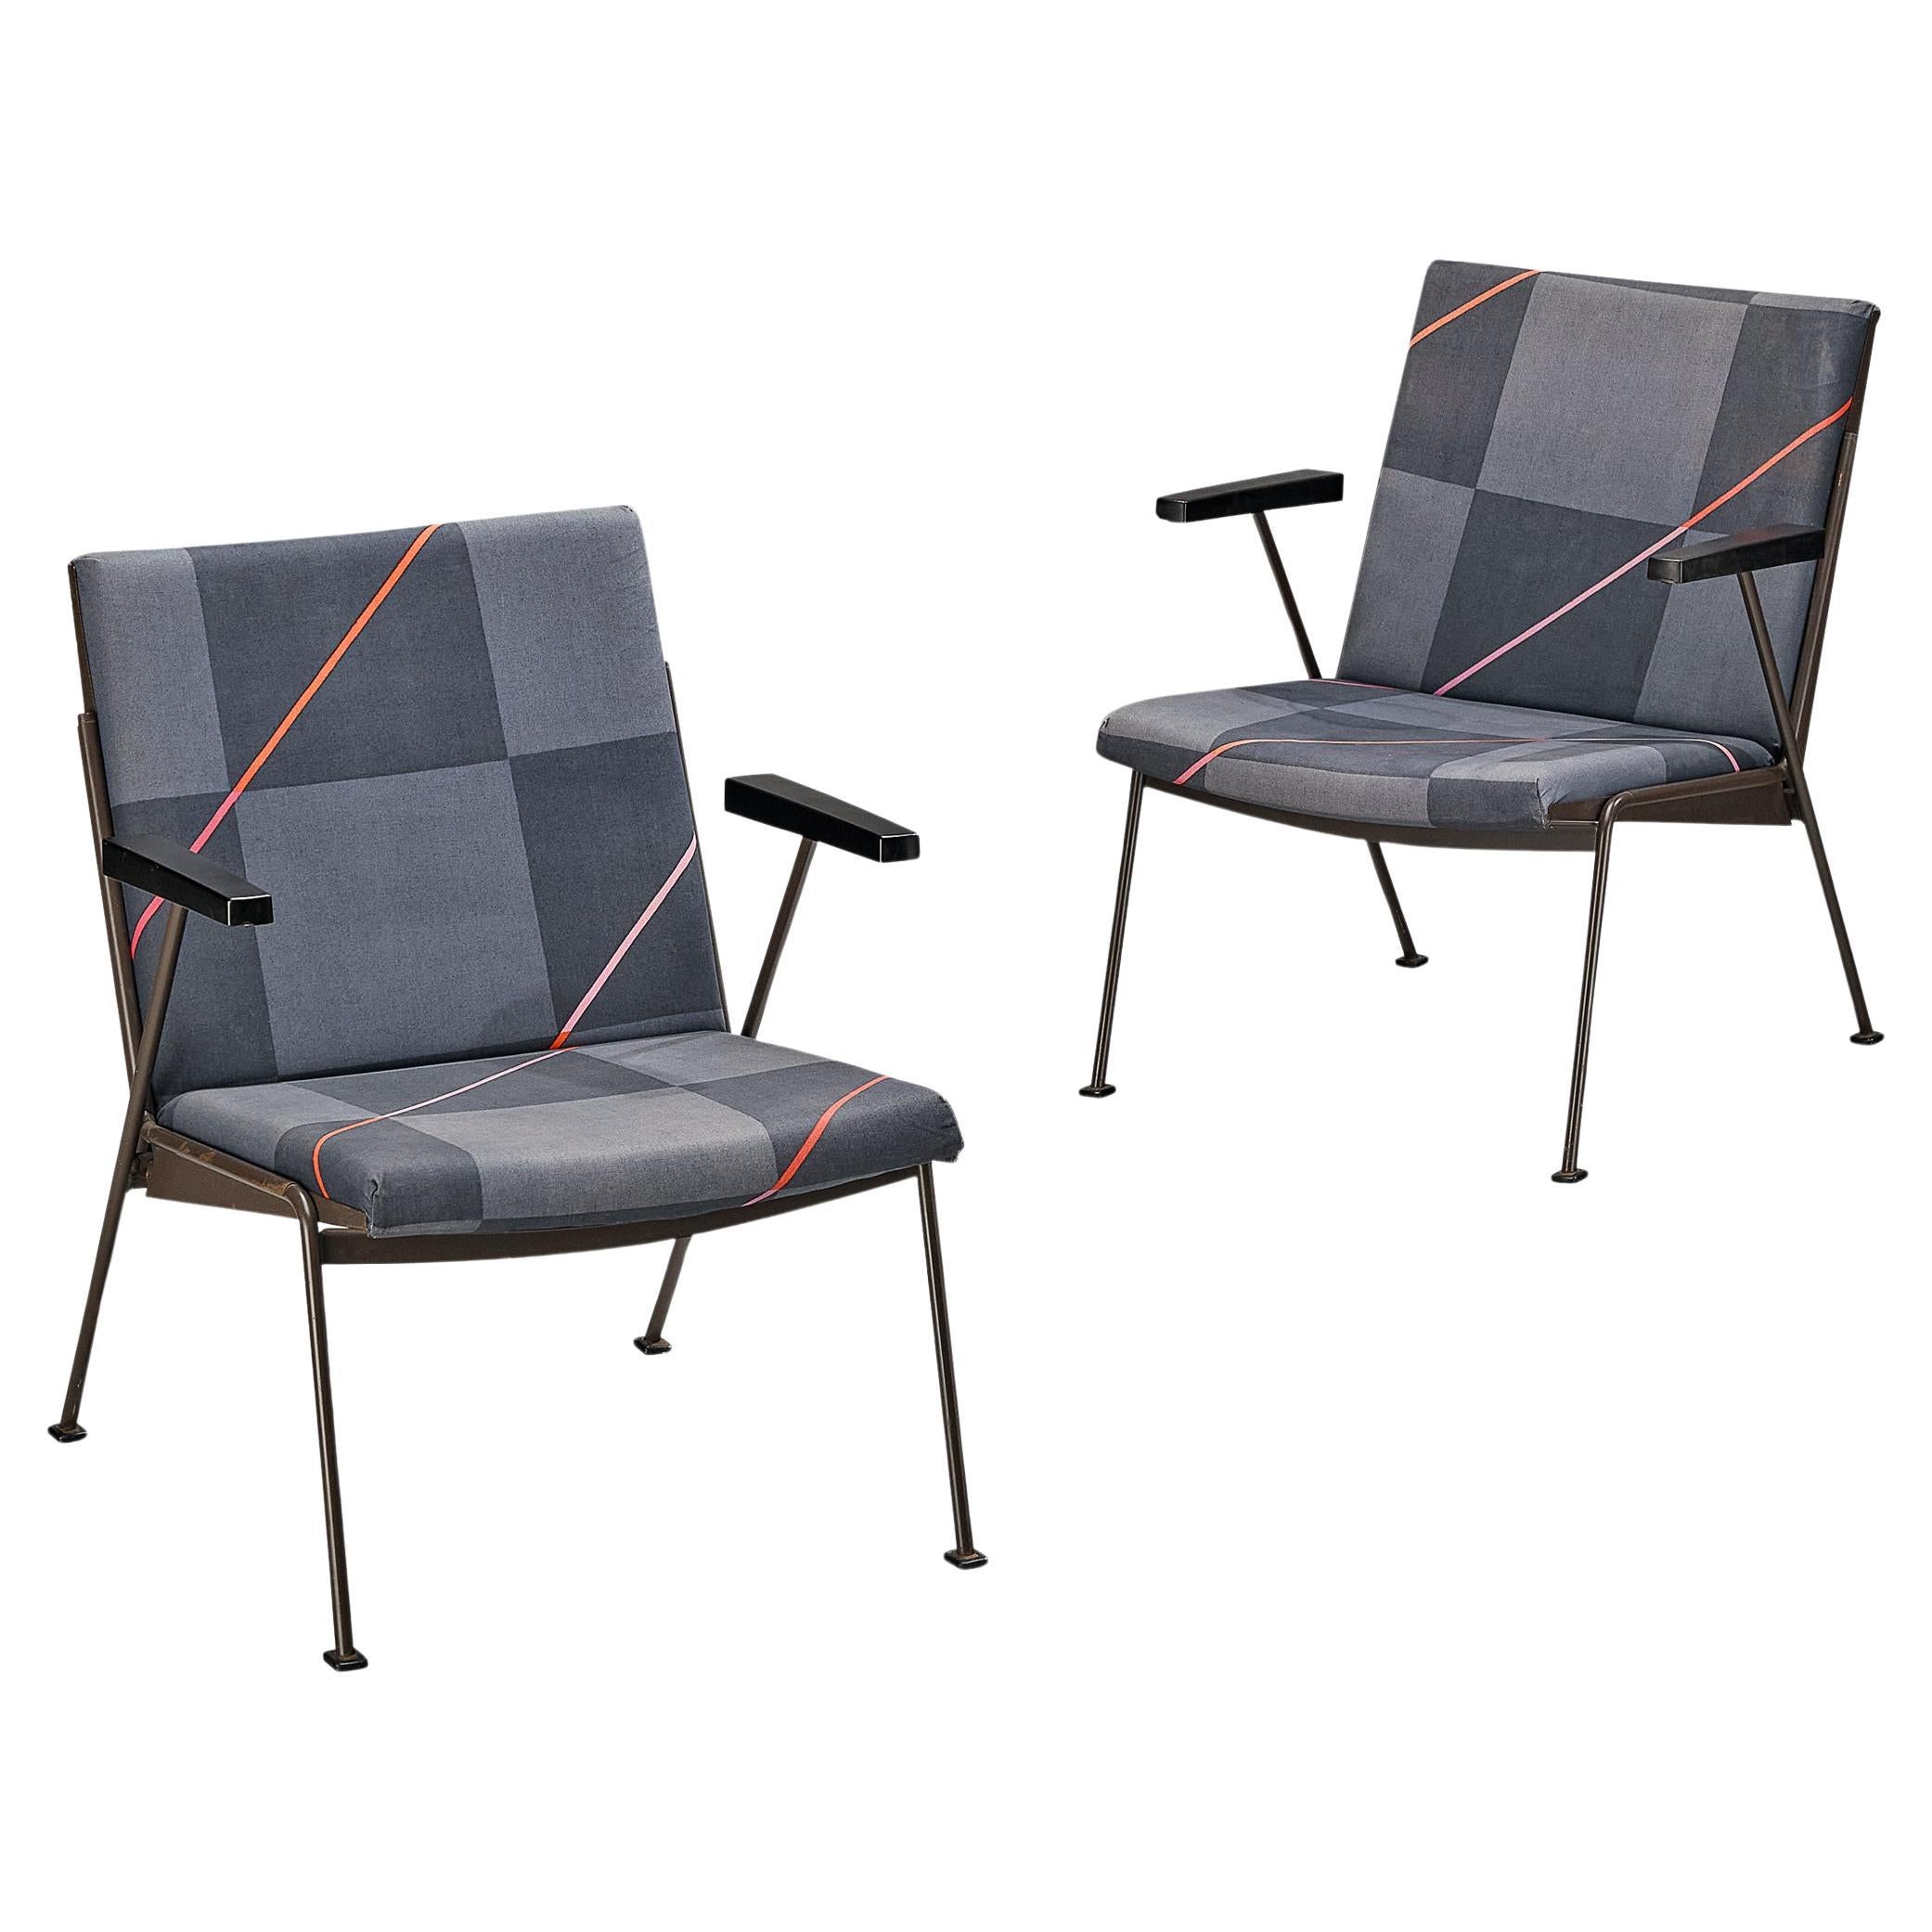 Wim Rietveld for Ahrend De Cirkel 'Oase' Lounge Chairs 